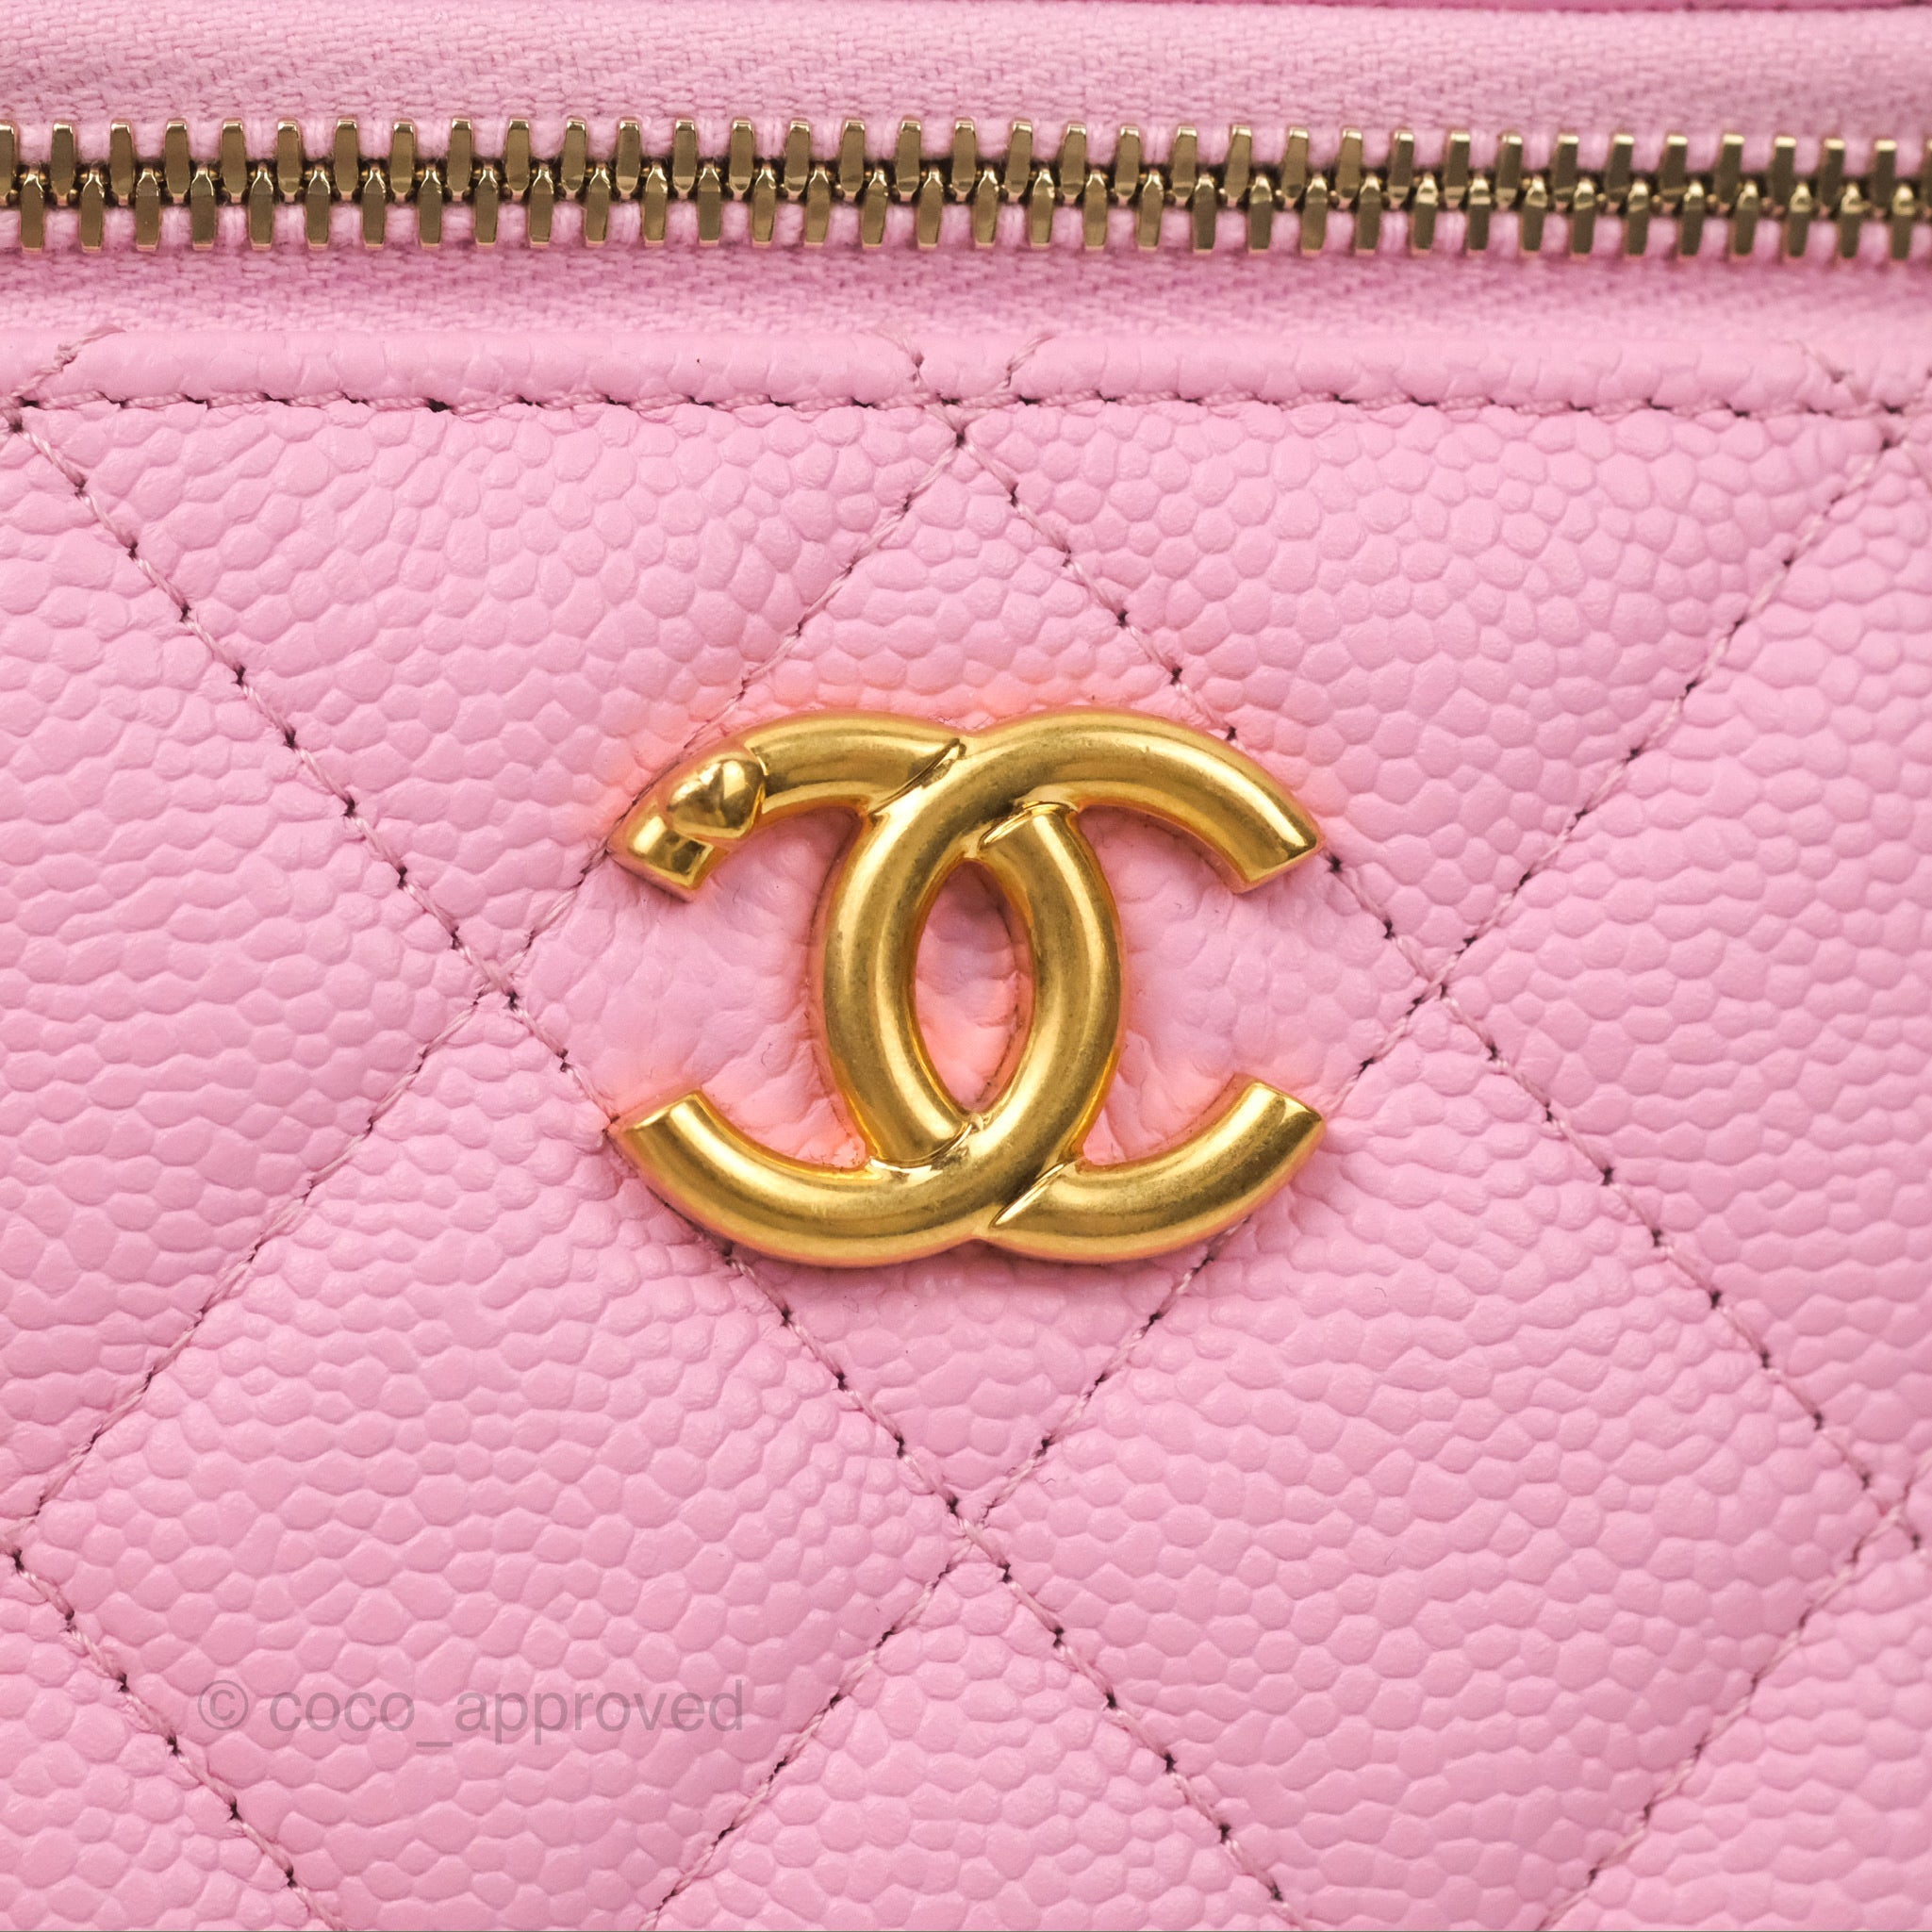 Chanel Caviar Vanity Hot Pink Quilted CC Chain Vanity Shoulder Crossbody  RARE!